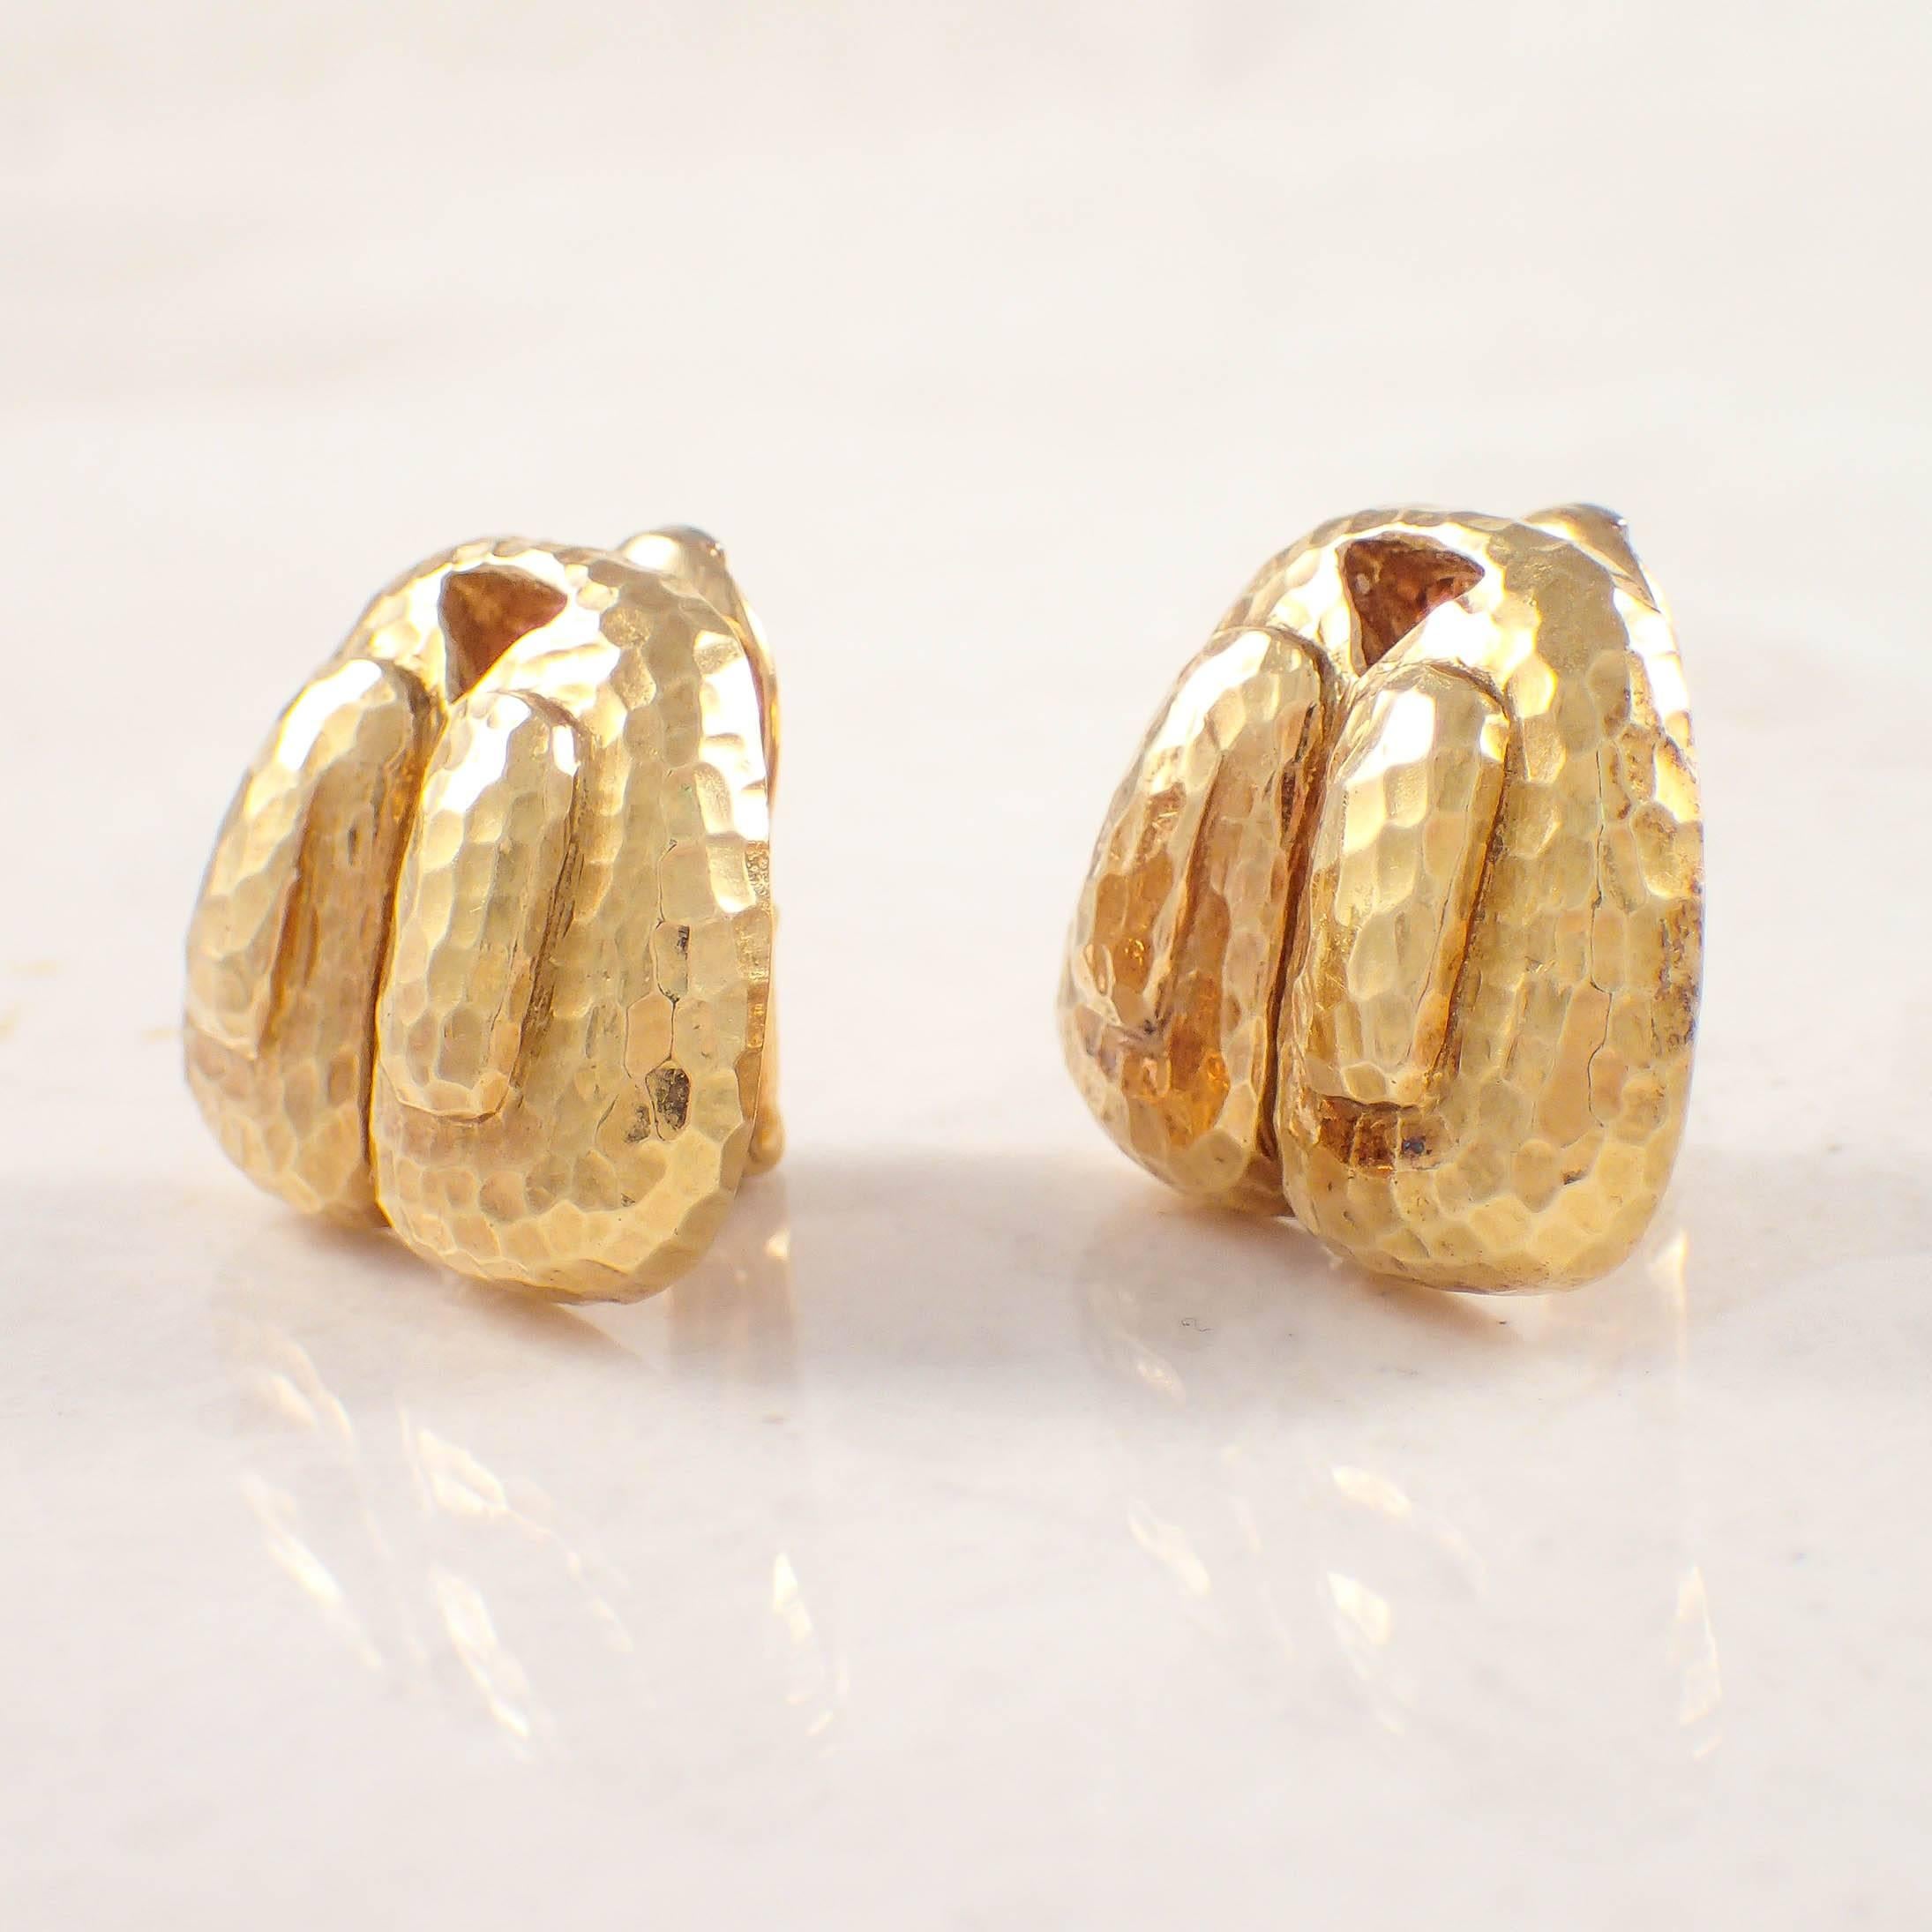 18K Yellow gold David Webb earrings. The hammered gold clip-on earrings measure 19.7 X 23.8 mm and weigh 21.9 grams. Stamped 